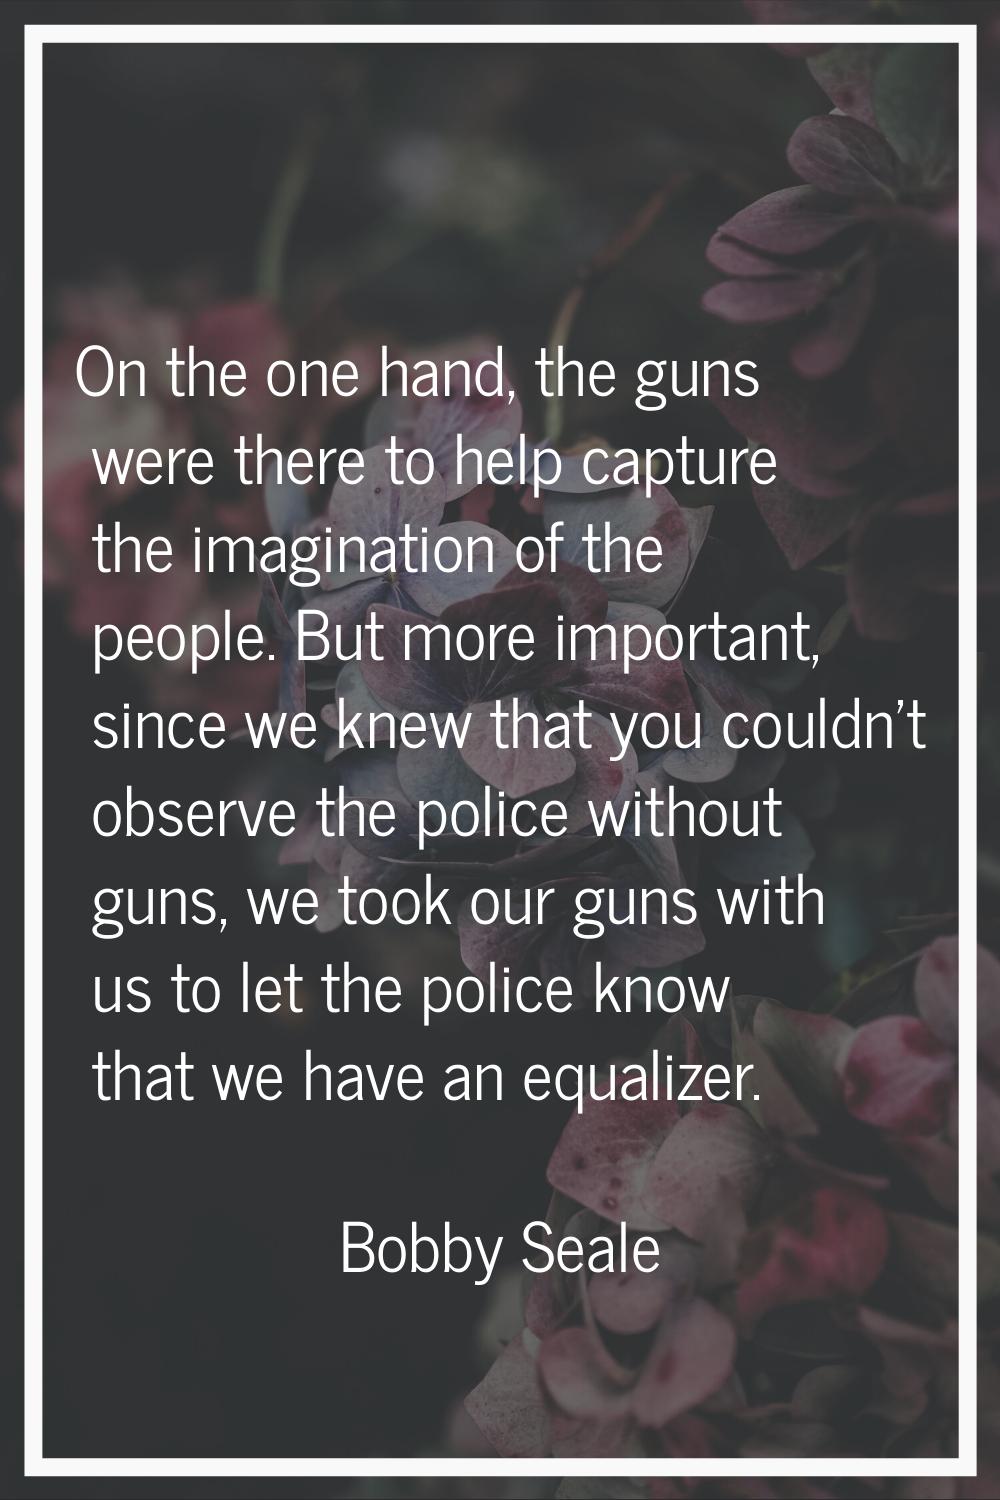 On the one hand, the guns were there to help capture the imagination of the people. But more import